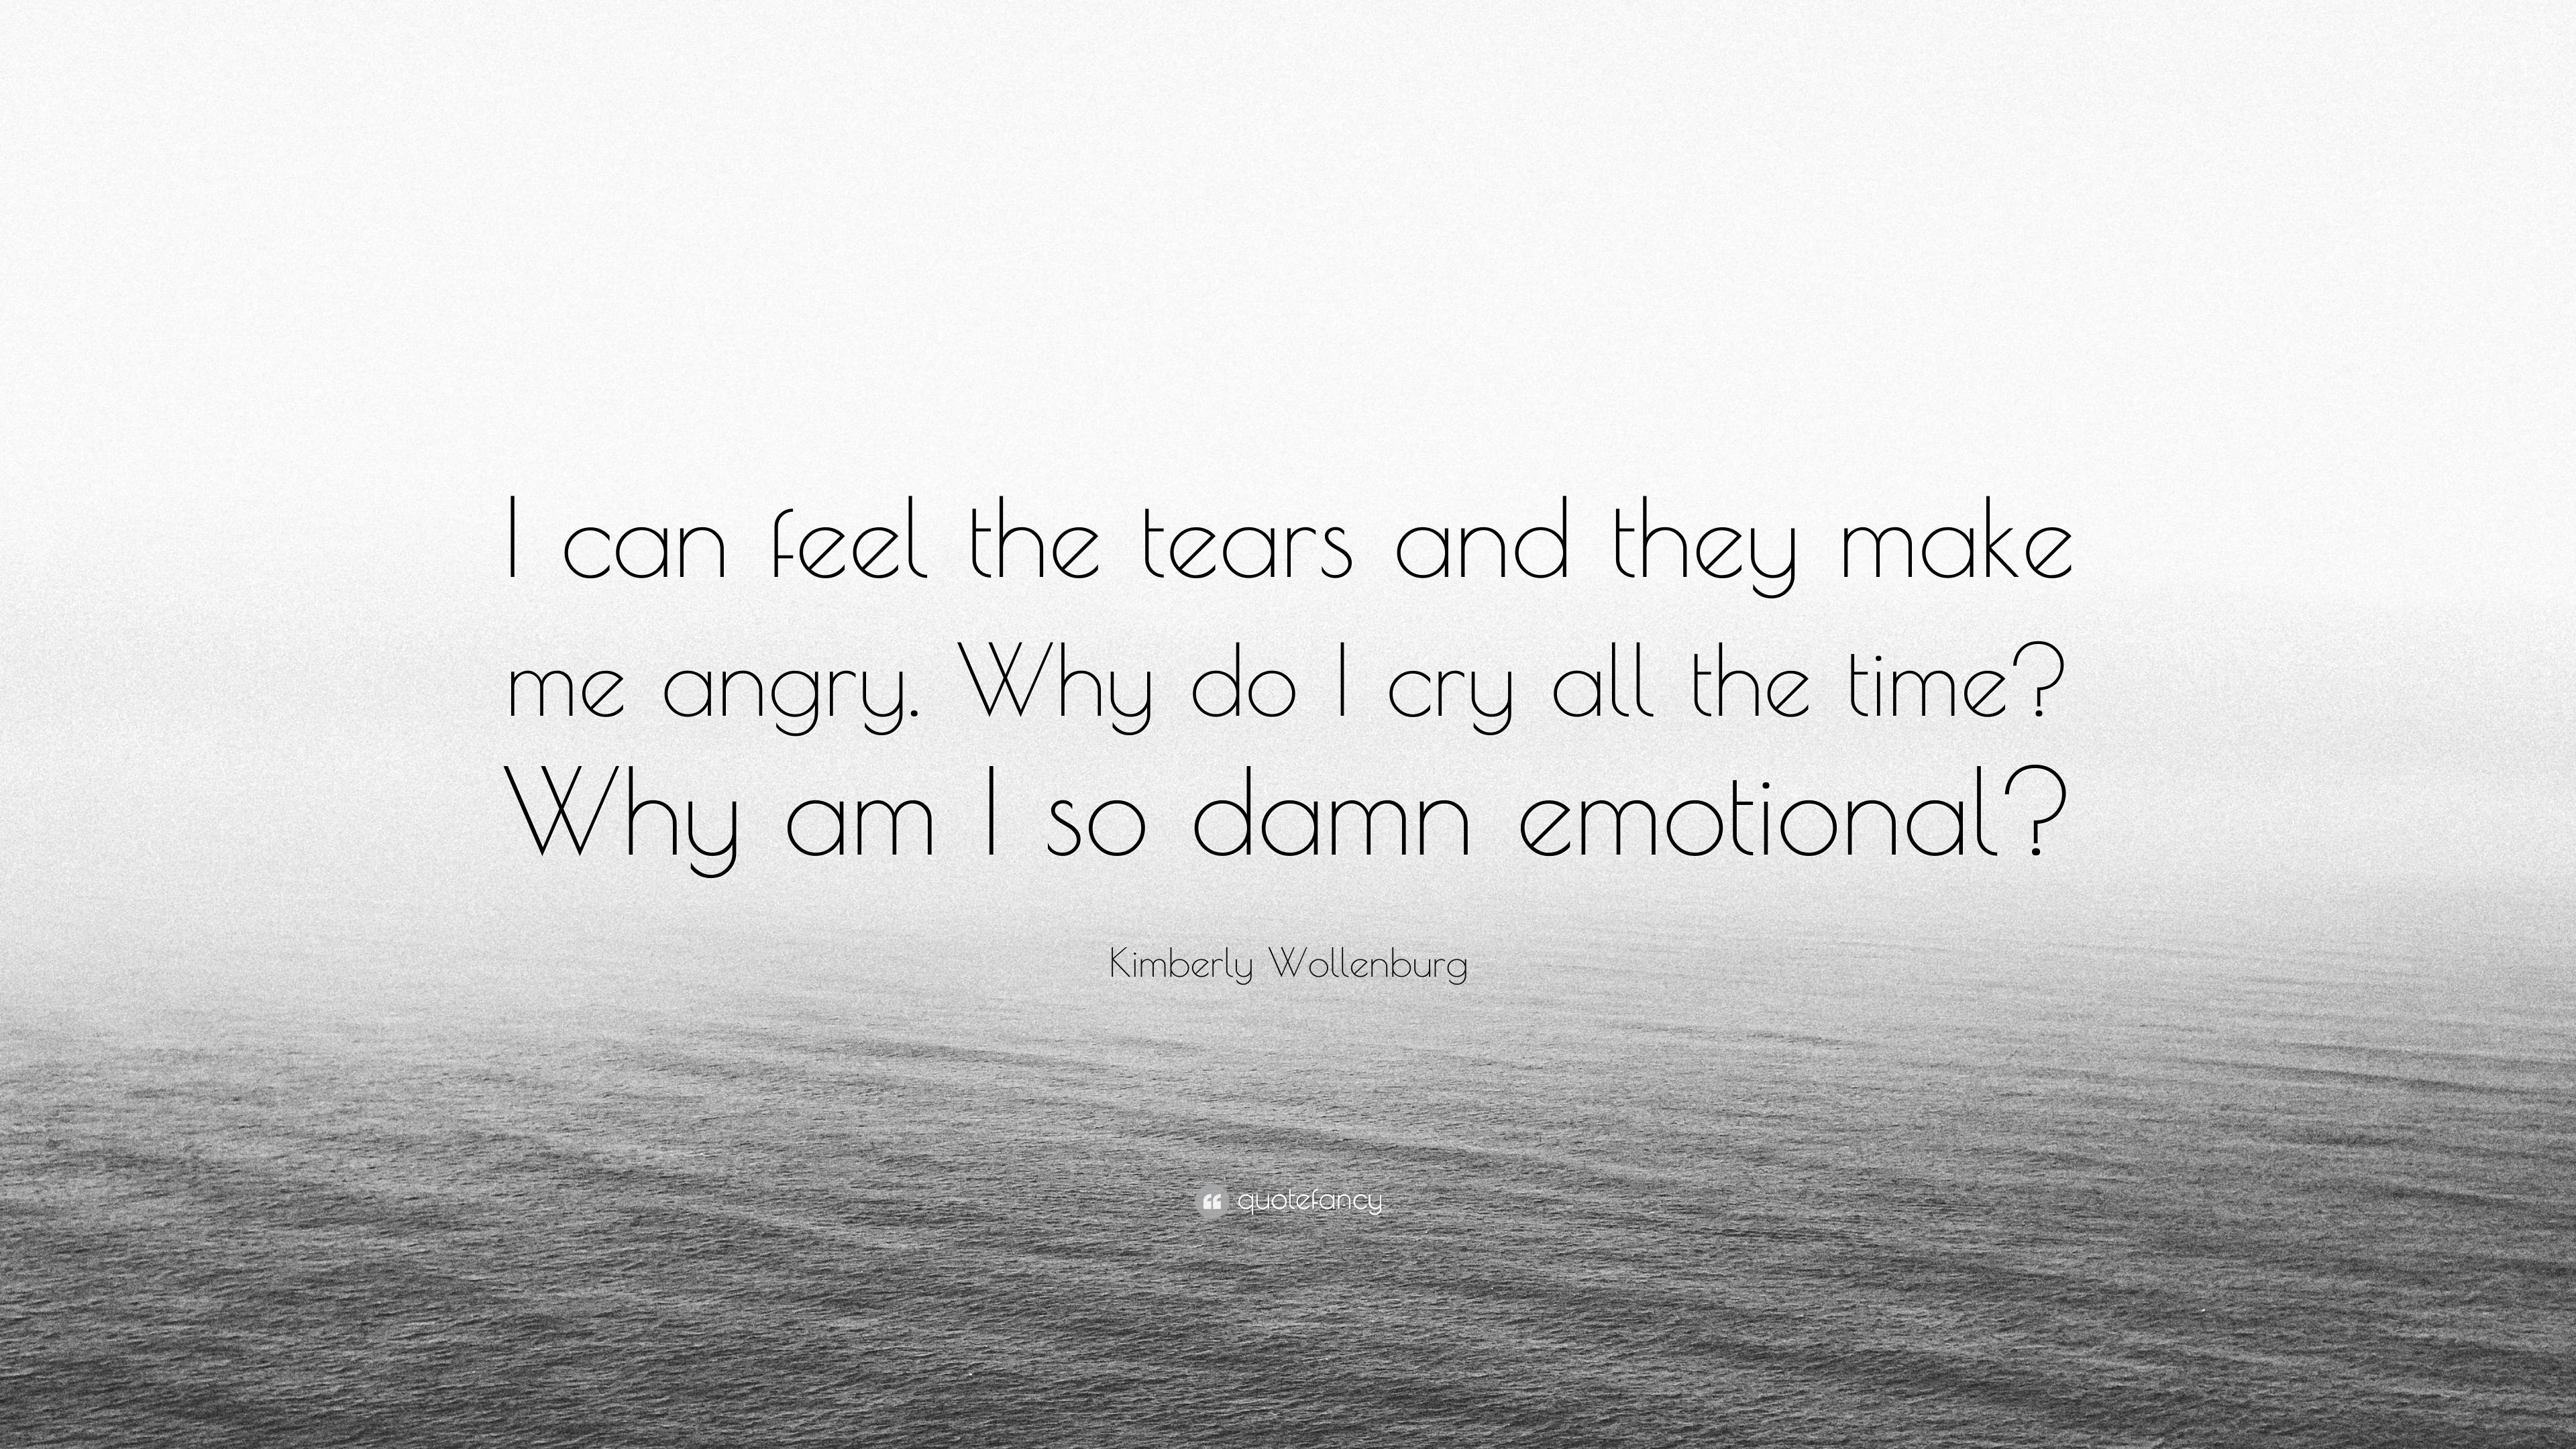 Kimberly Wollenburg Quote: “I can feel the tears and they make me